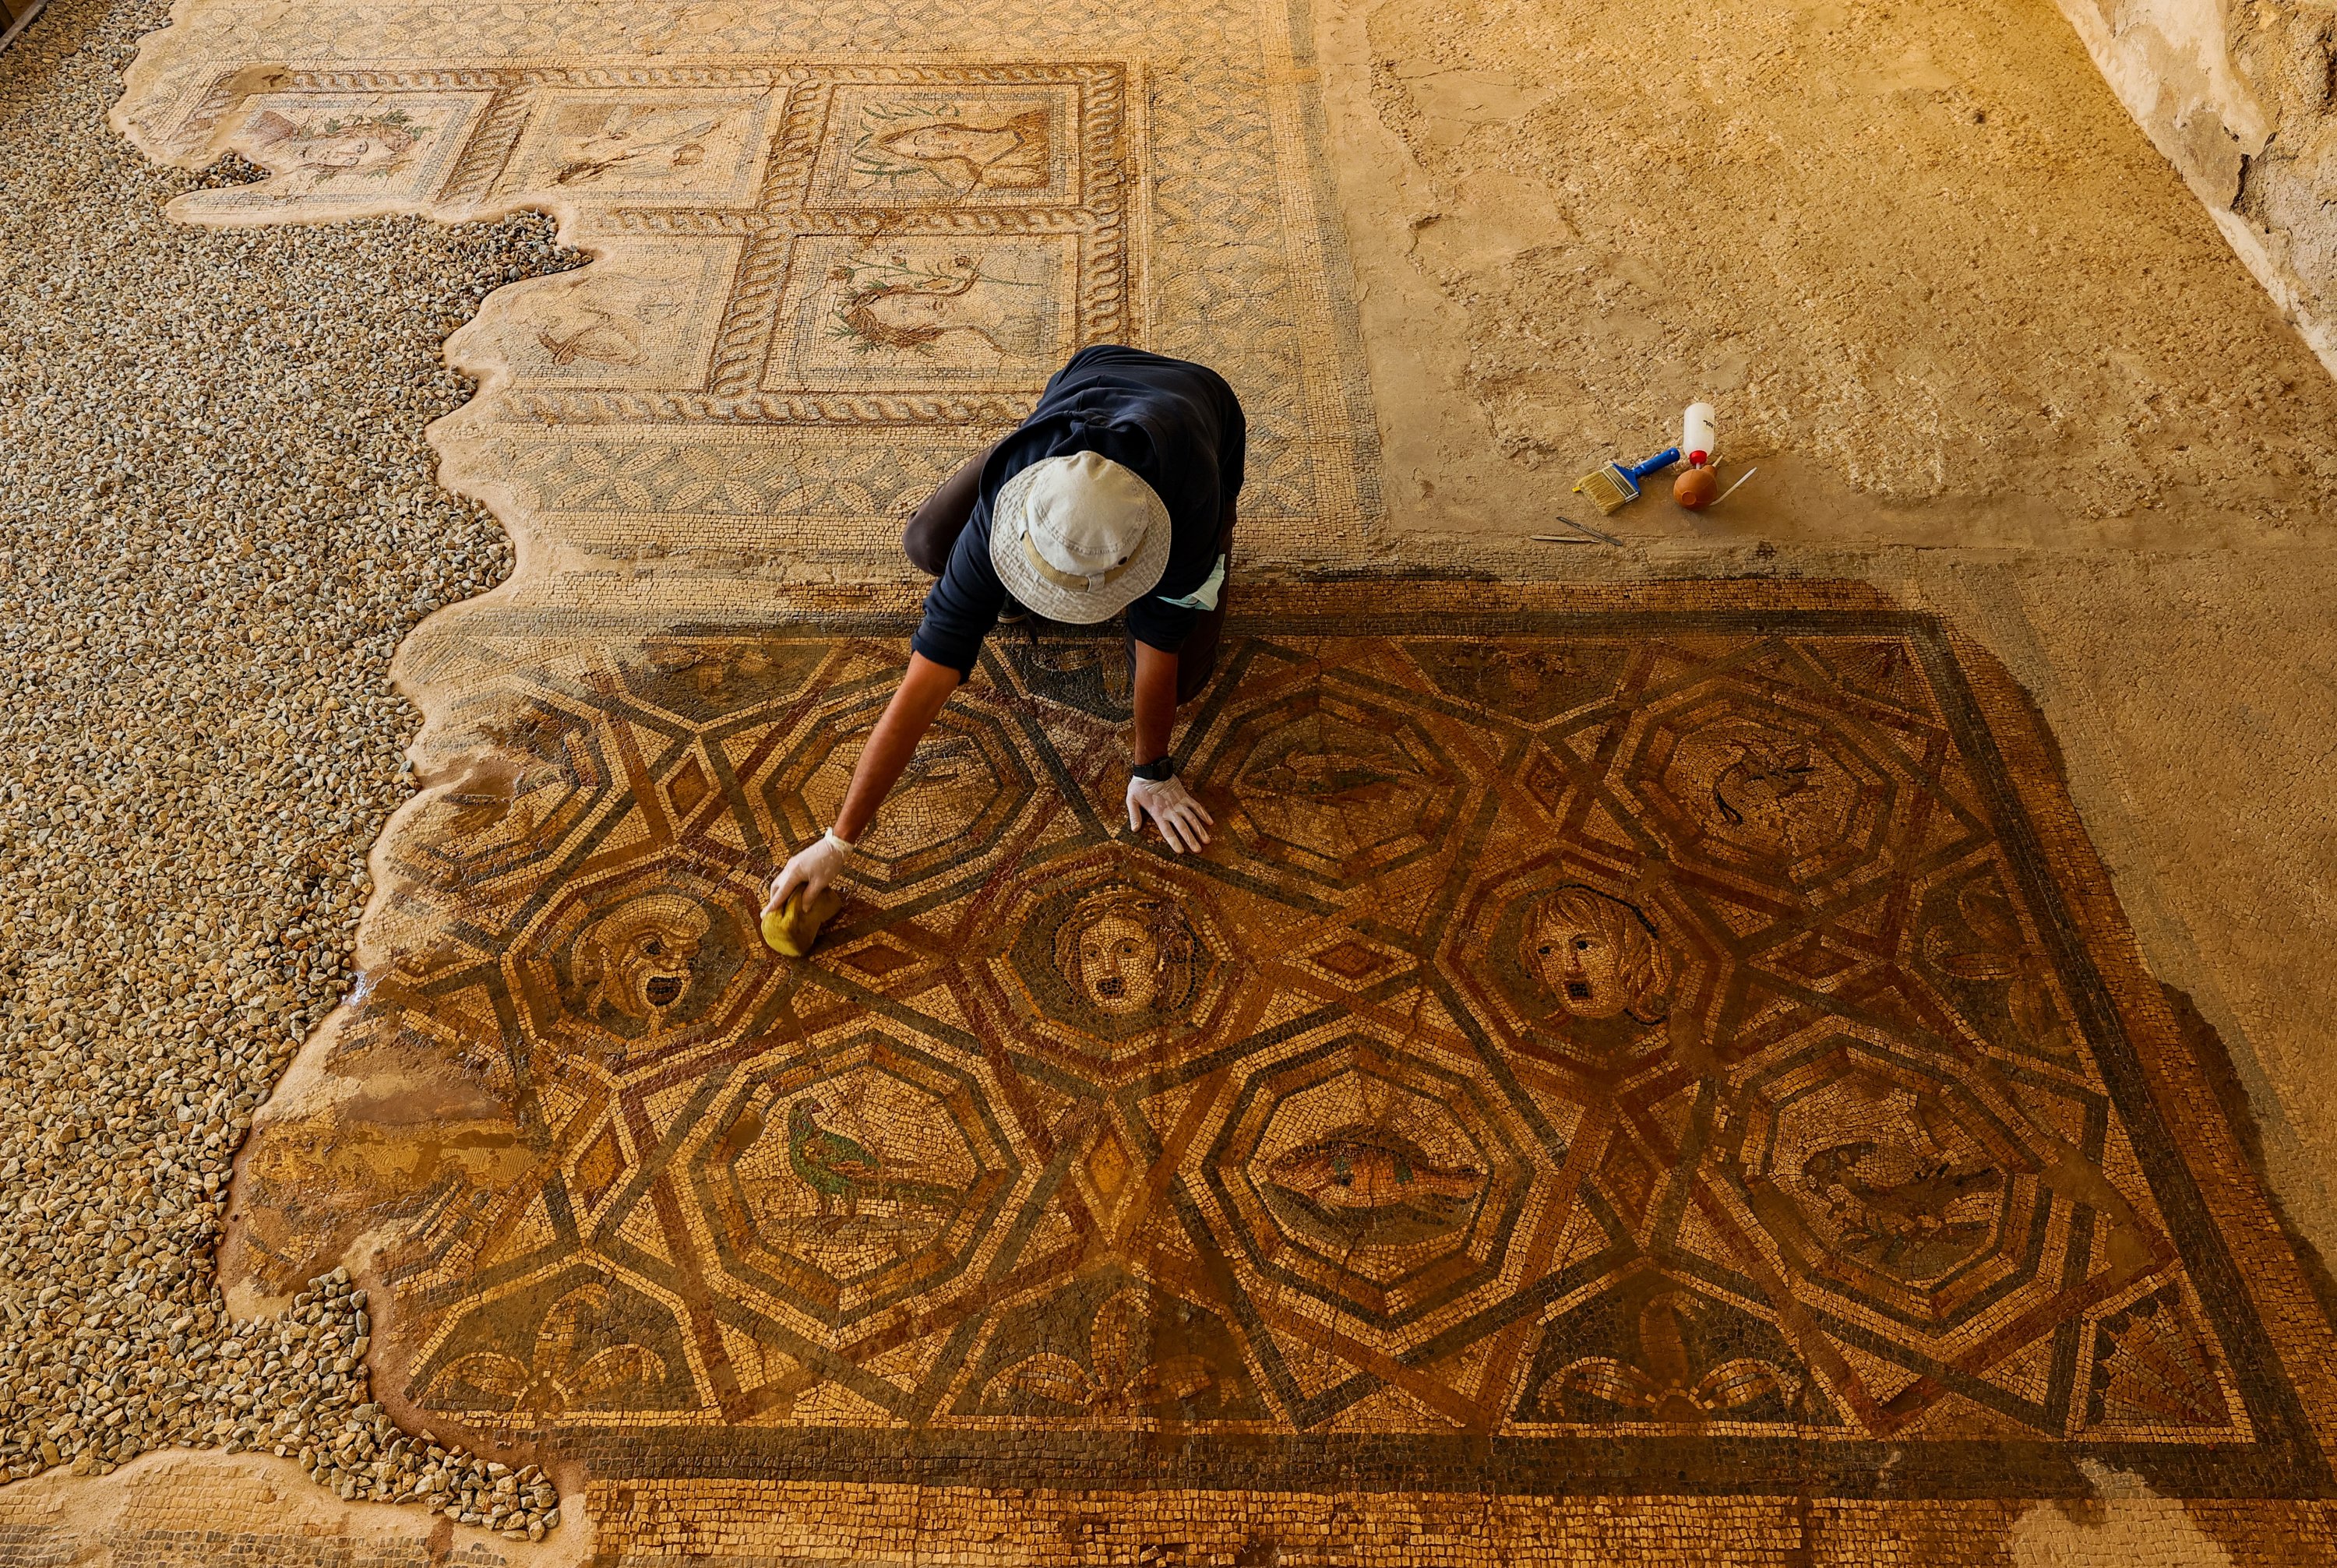 Archaeologists Unearthed Three Ancient Greek Mosaics 2nd Century BC - Mnews